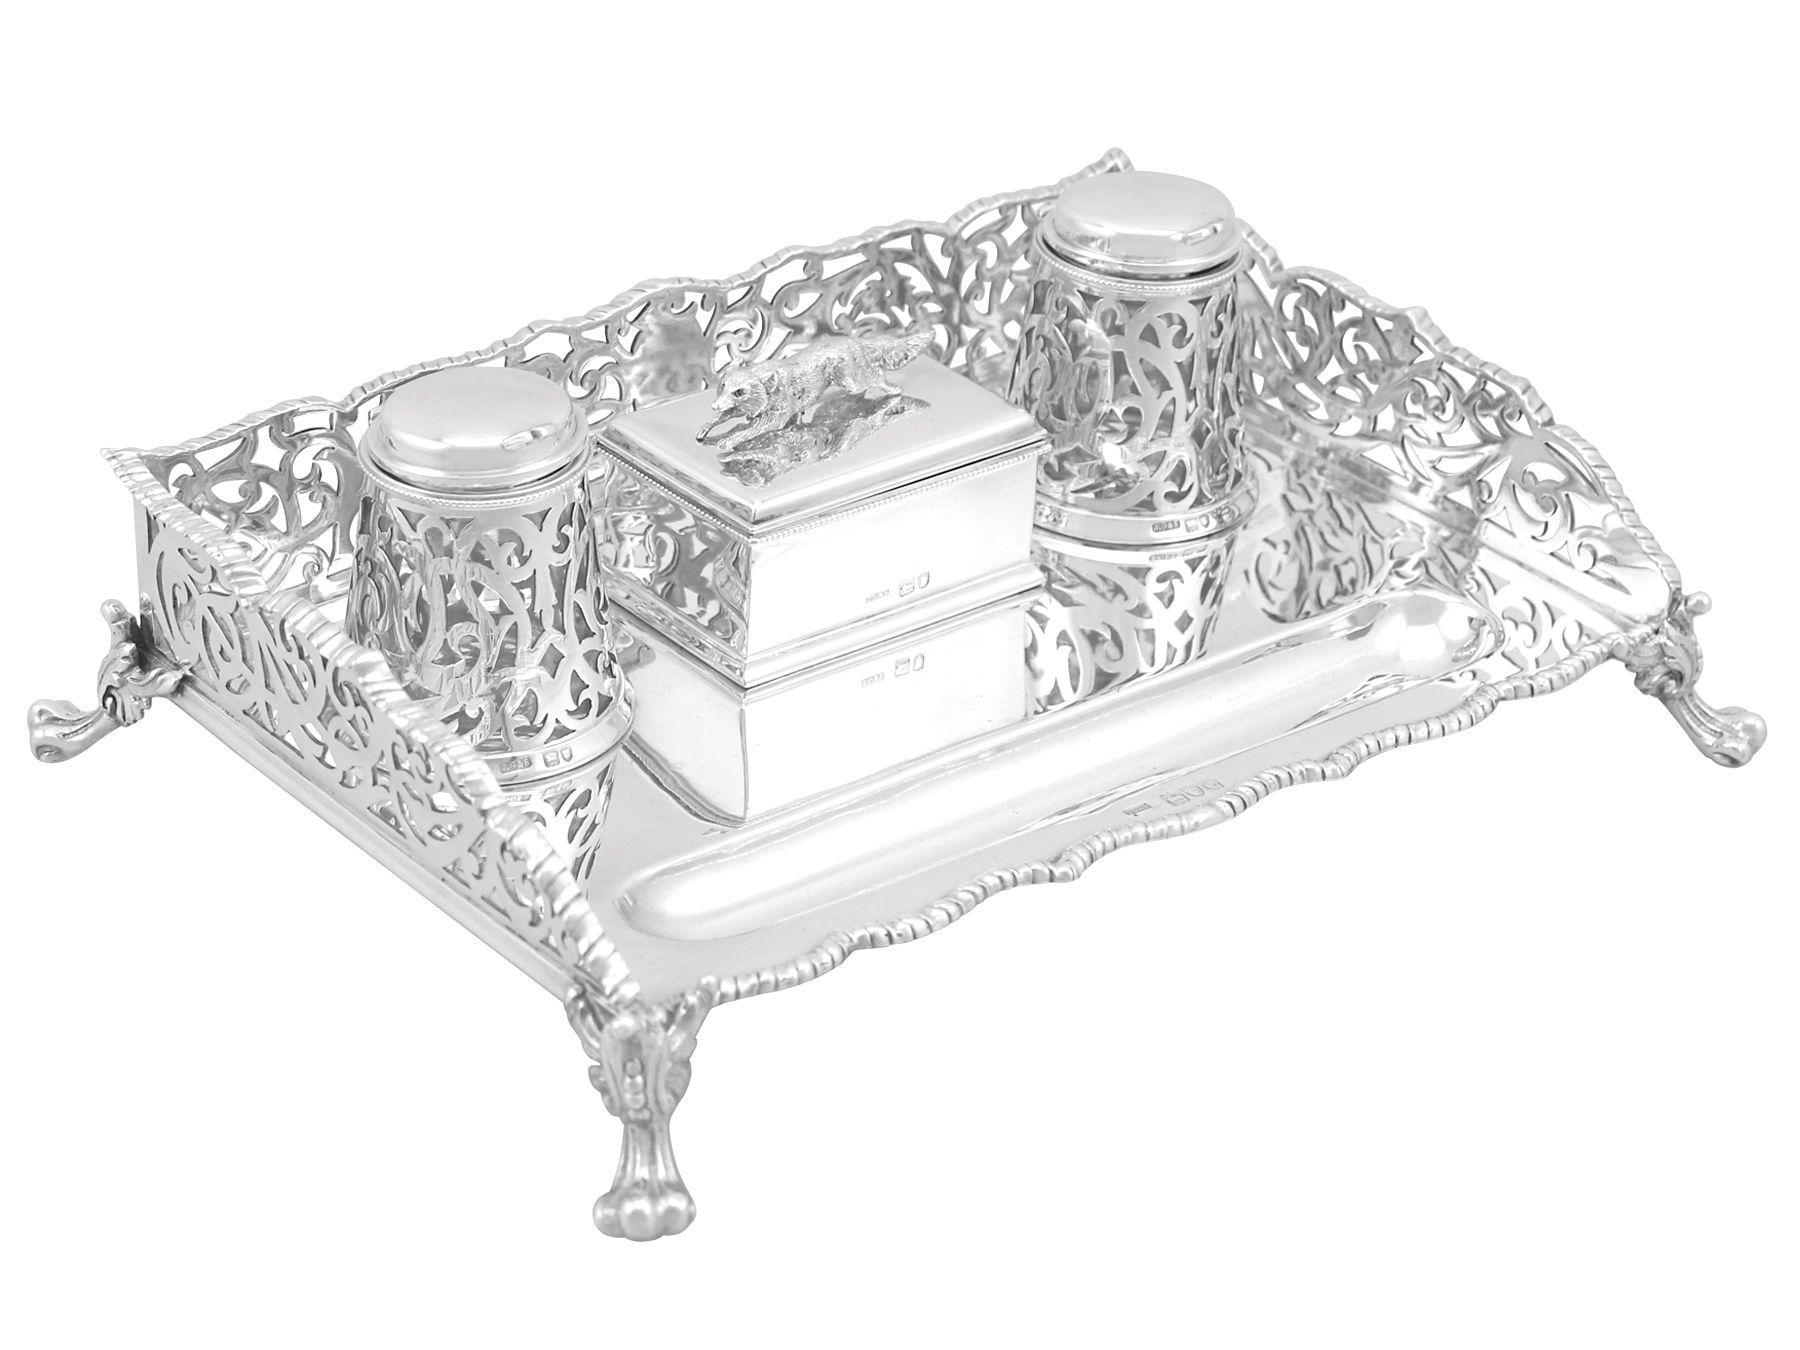 British Antique Victorian 1898 Sterling Silver Gallery Inkstand by John Grinsell & Sons For Sale